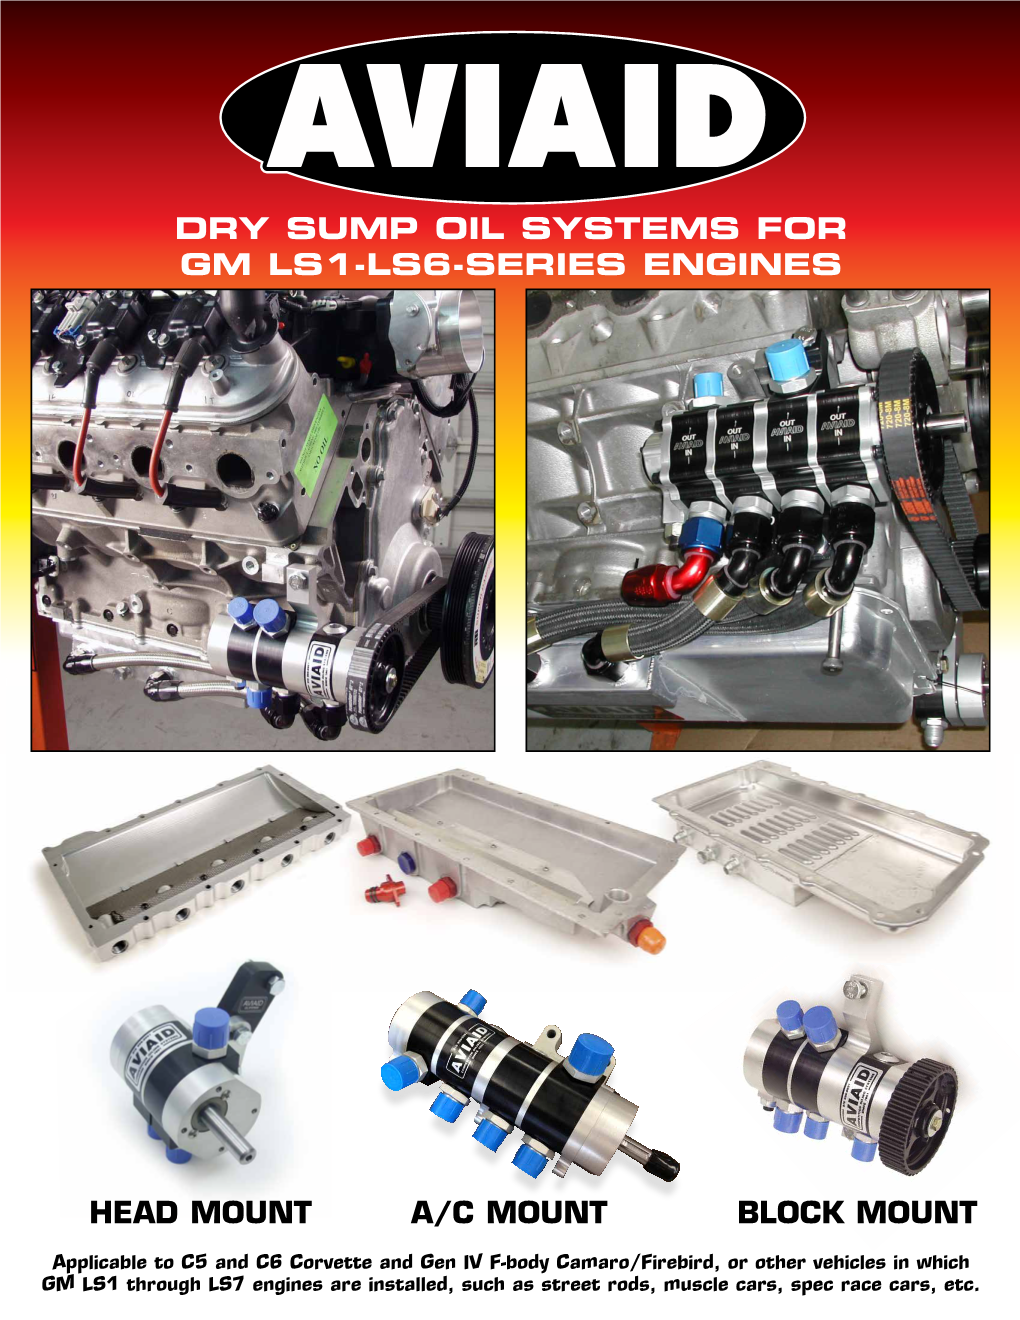 Dry Sump Oil Systems for Gm Ls1-Ls6-Series Engines A/C